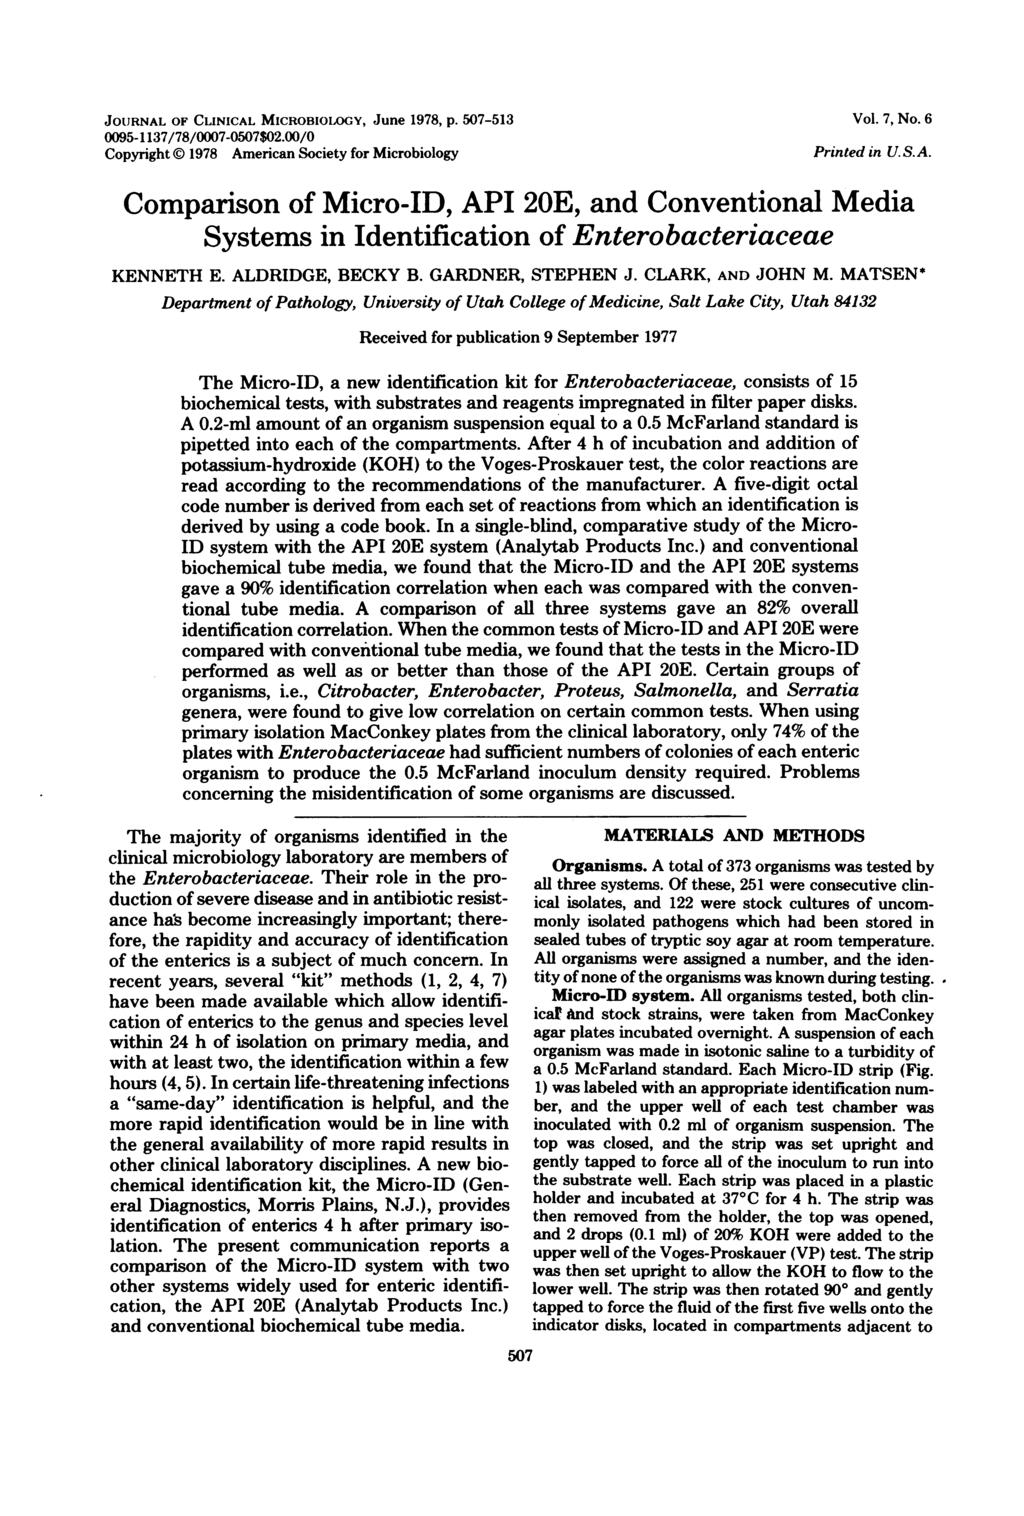 JOURNAL OF CLINICAL MICROBIOLOGY, June 978, p. 507-53 0095-37/78/0007-0507$0.00/0 Copyright 978 American Society for Microbiology Vol. 7, No. 6 Printed in U.S.A. Comparison of Micro-ID, API 0E, and Conventional Media Systems in Identification of Enterobacteriaceae KENNETH E.